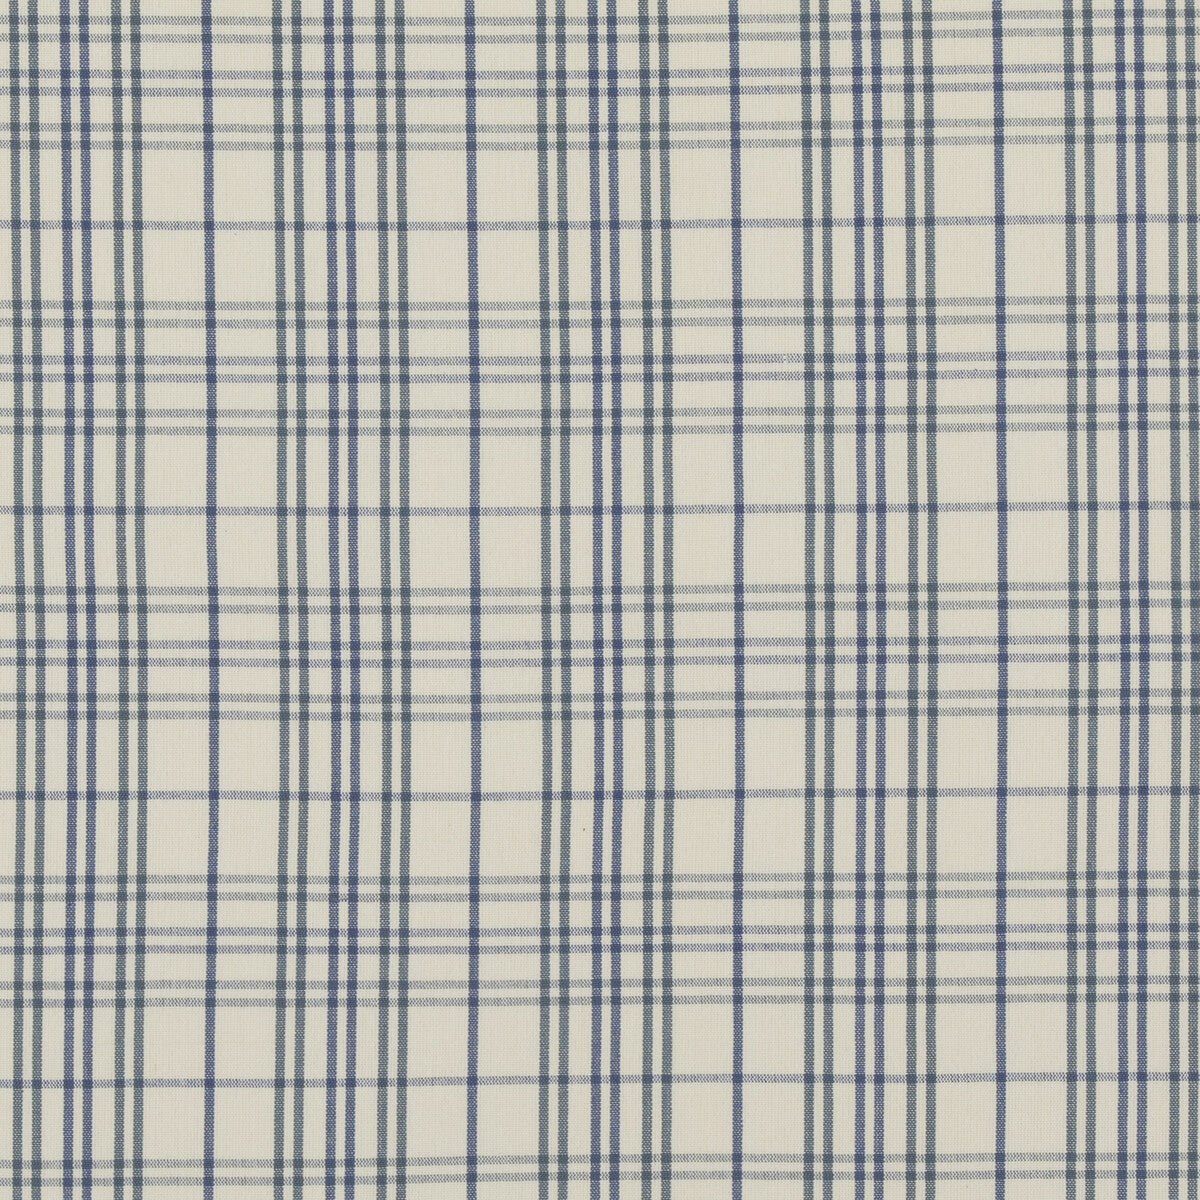 Purbeck Check fabric in blue color - pattern PF50508.1.0 - by Baker Lifestyle in the Bridport collection